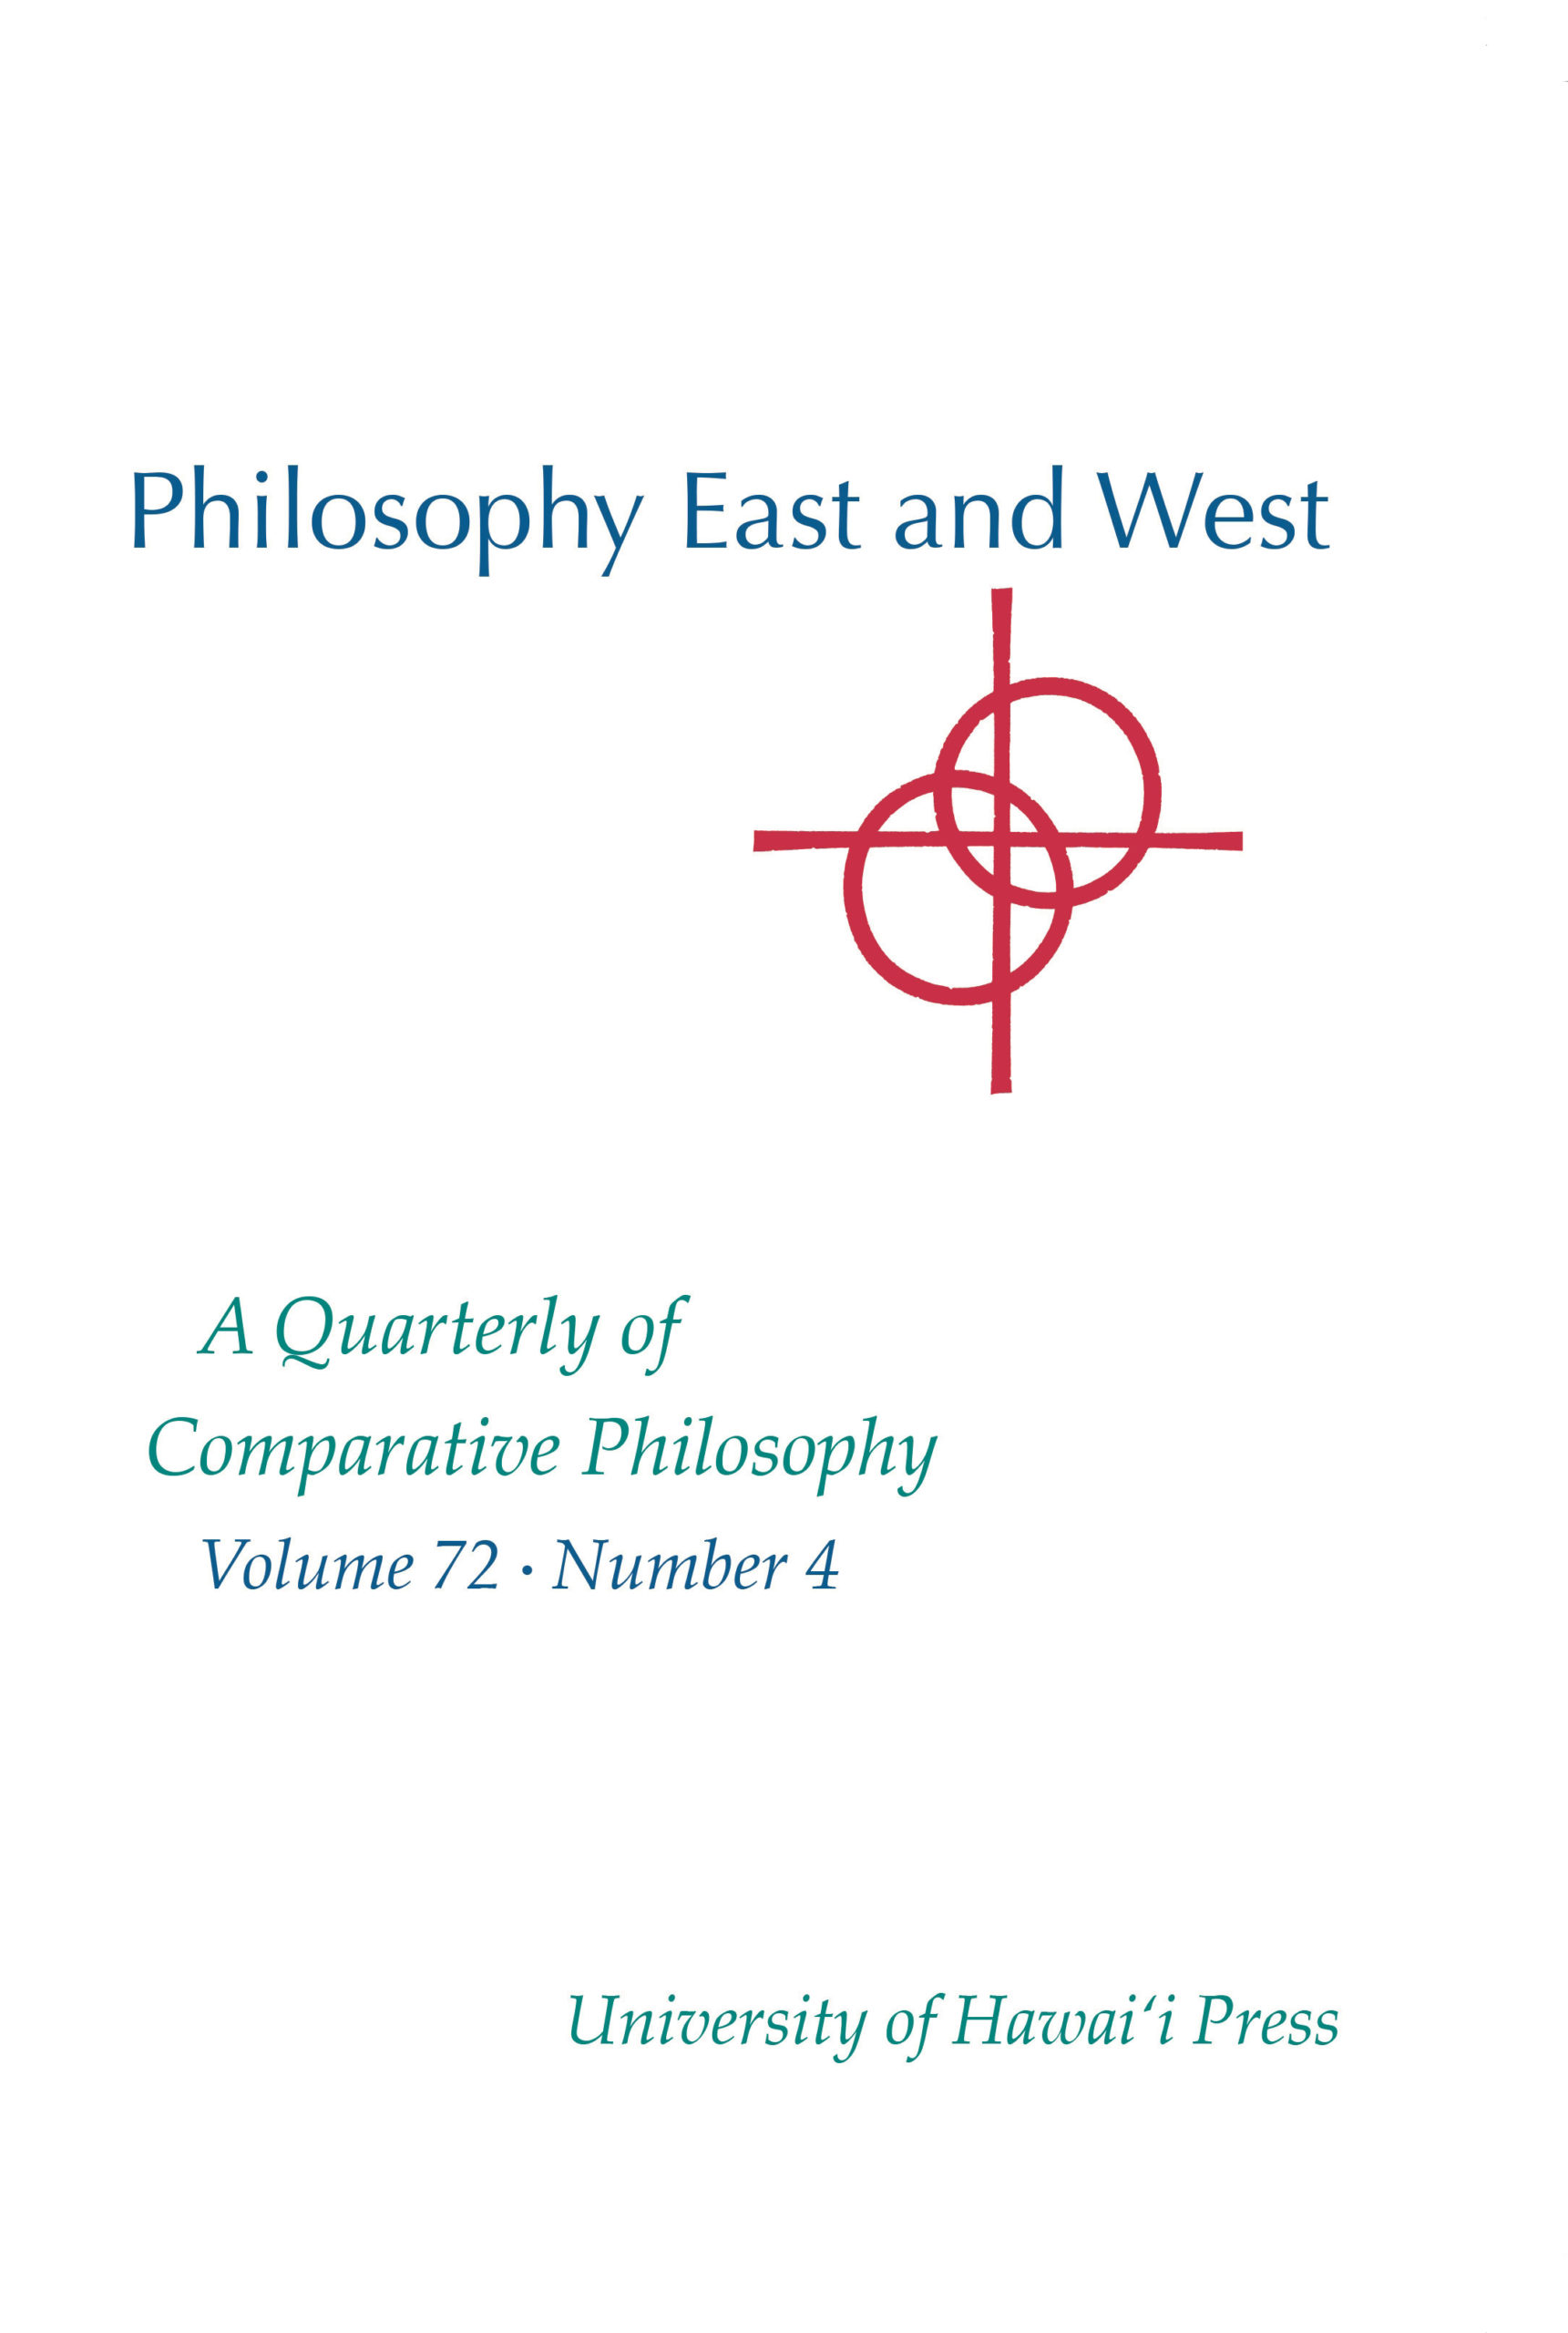 Philosophy East and West: A Quarterly of Comparative Philosophy